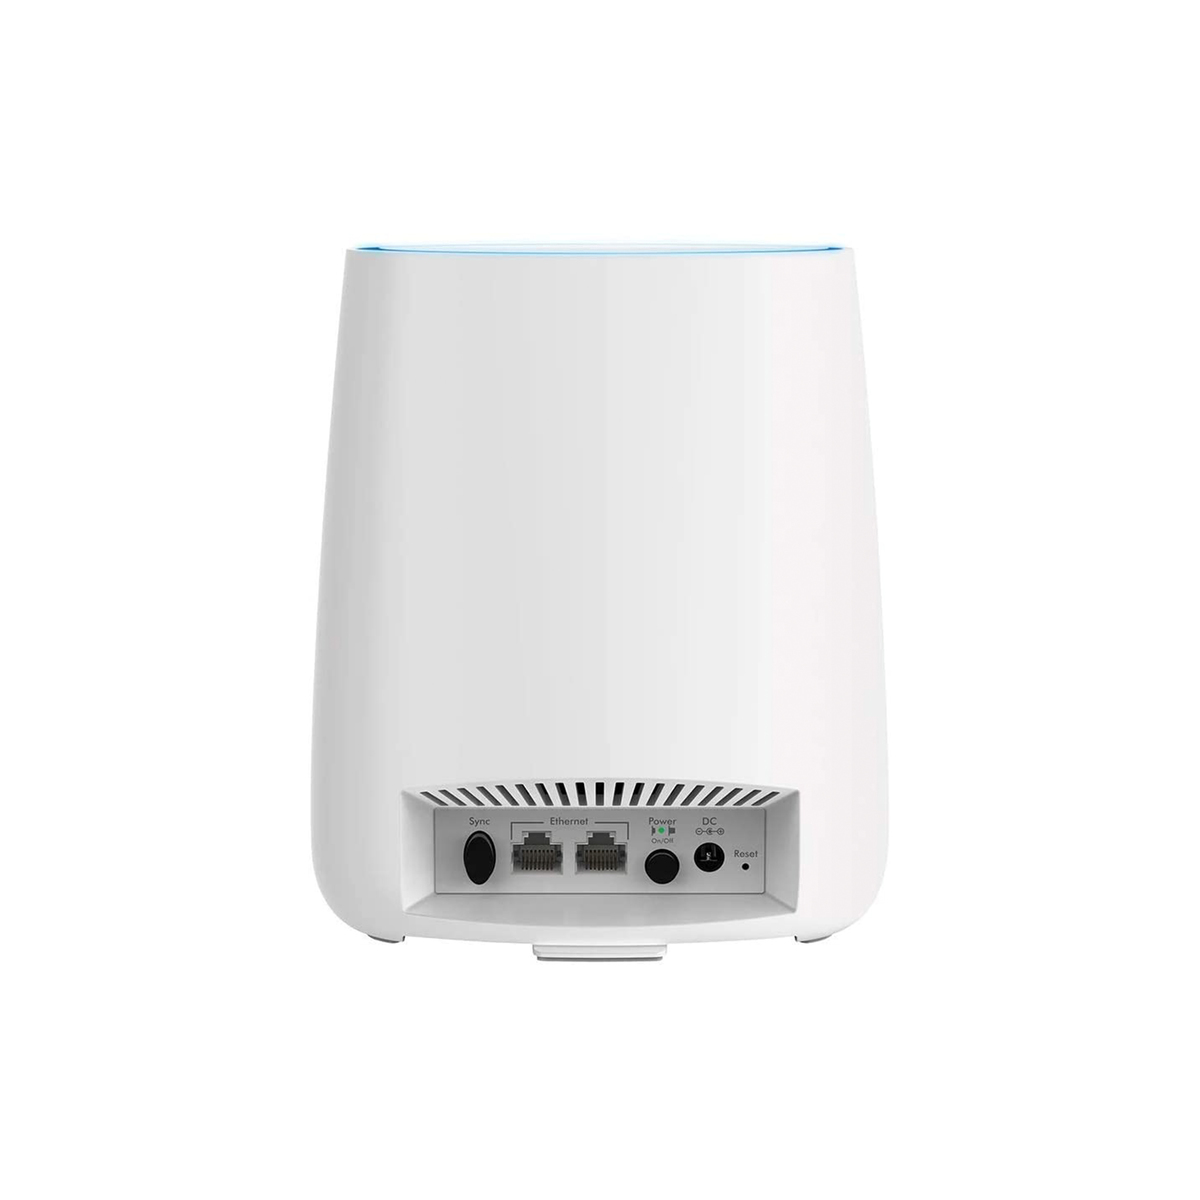 Netgear RBK23 Orbi Whole Home Mesh Wi-Fi System (Router and Satellite Network), Tri-Band AC2200 (2.2 Gbps) - Circle Parental Controls and Alexa Enabled RBK23-100UKS